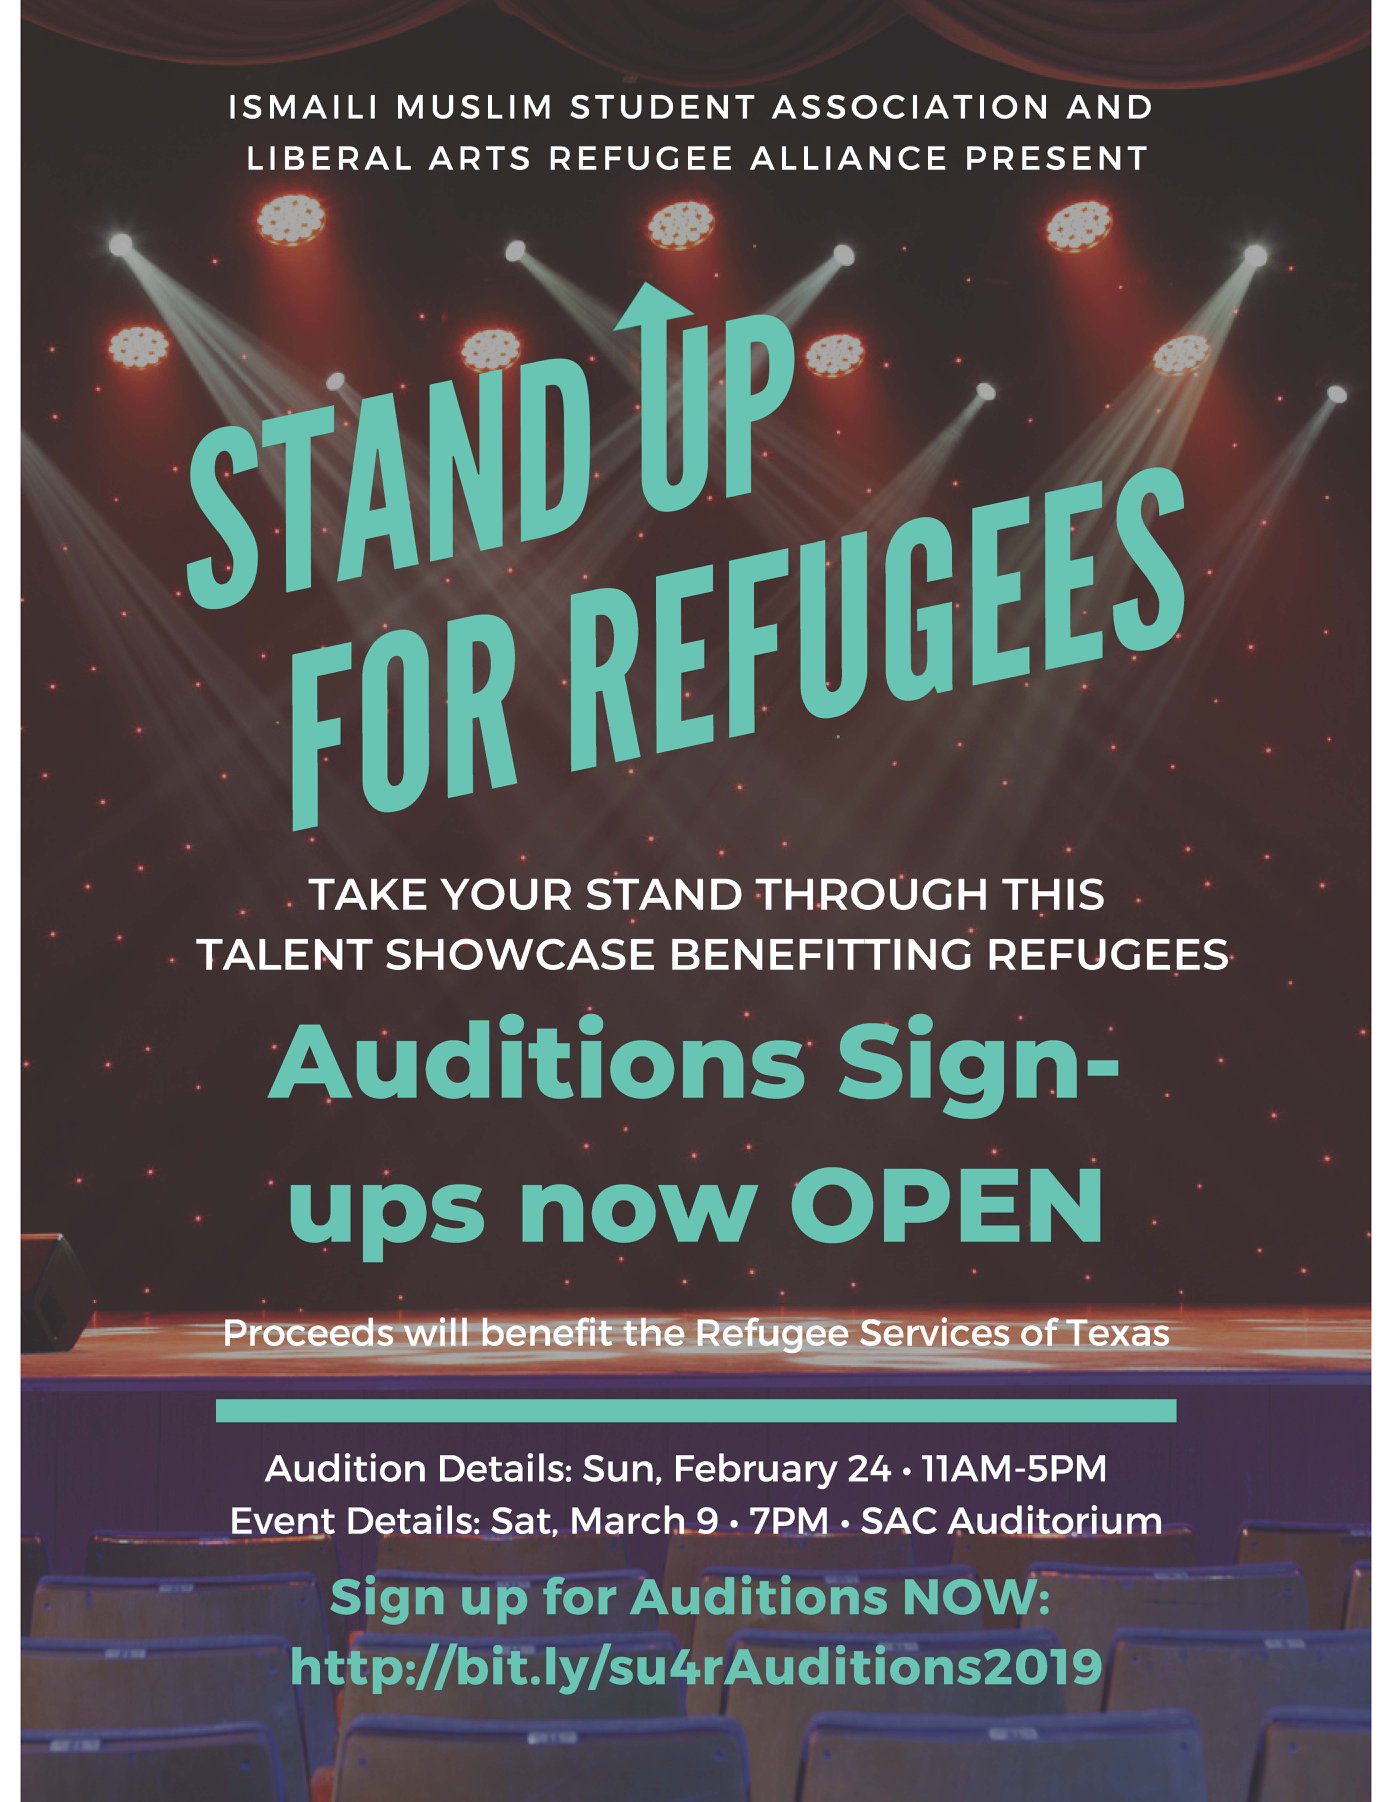 Stand Up for Refugees by IMSA & LARA